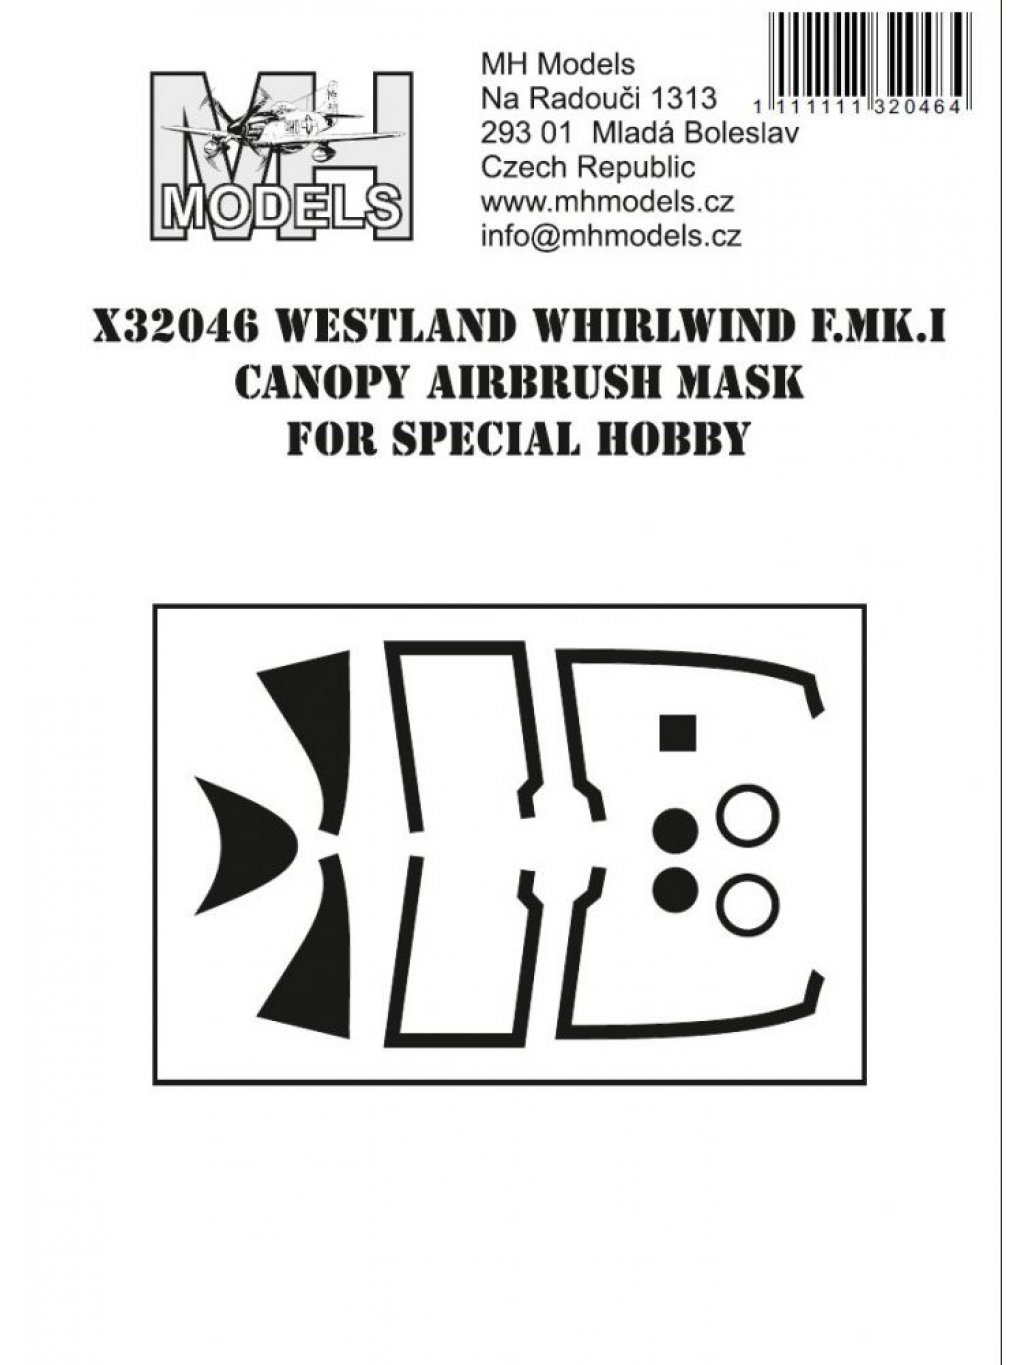 Westland Whirlwind F.Mk.I canopy airbrush mask for Special Hobby